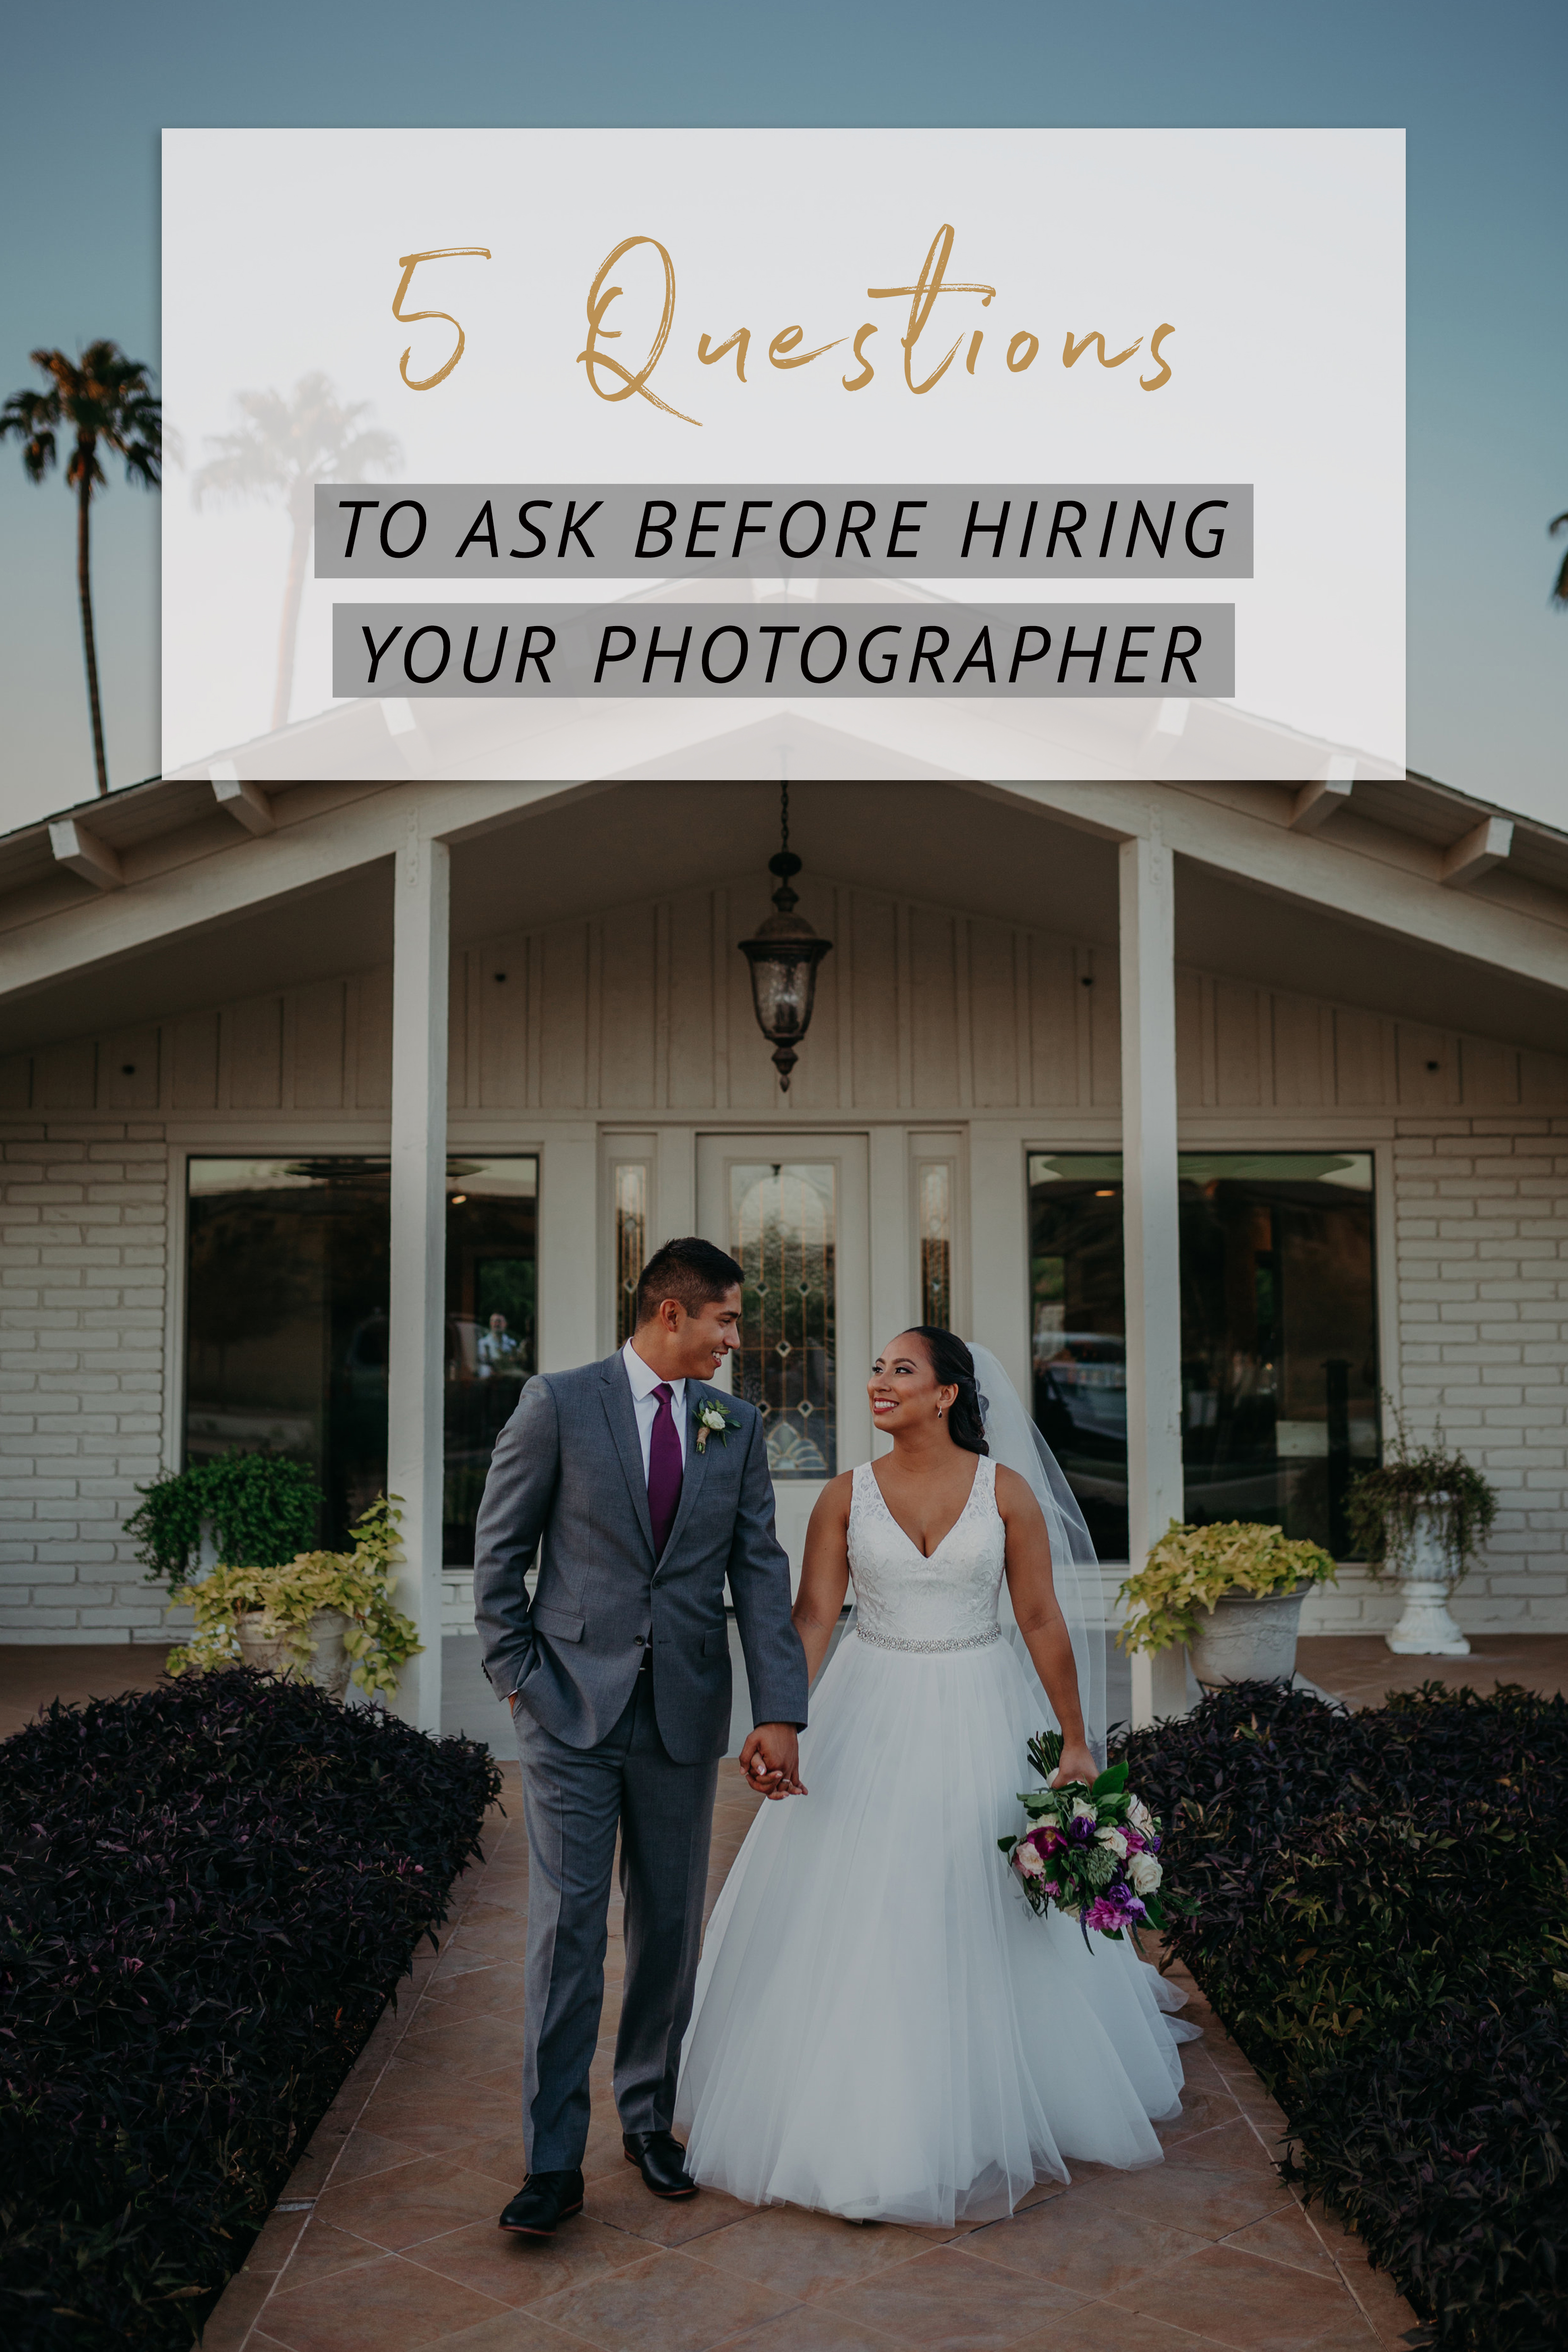 5 Questions to Ask Before Hiring Your Photographer.